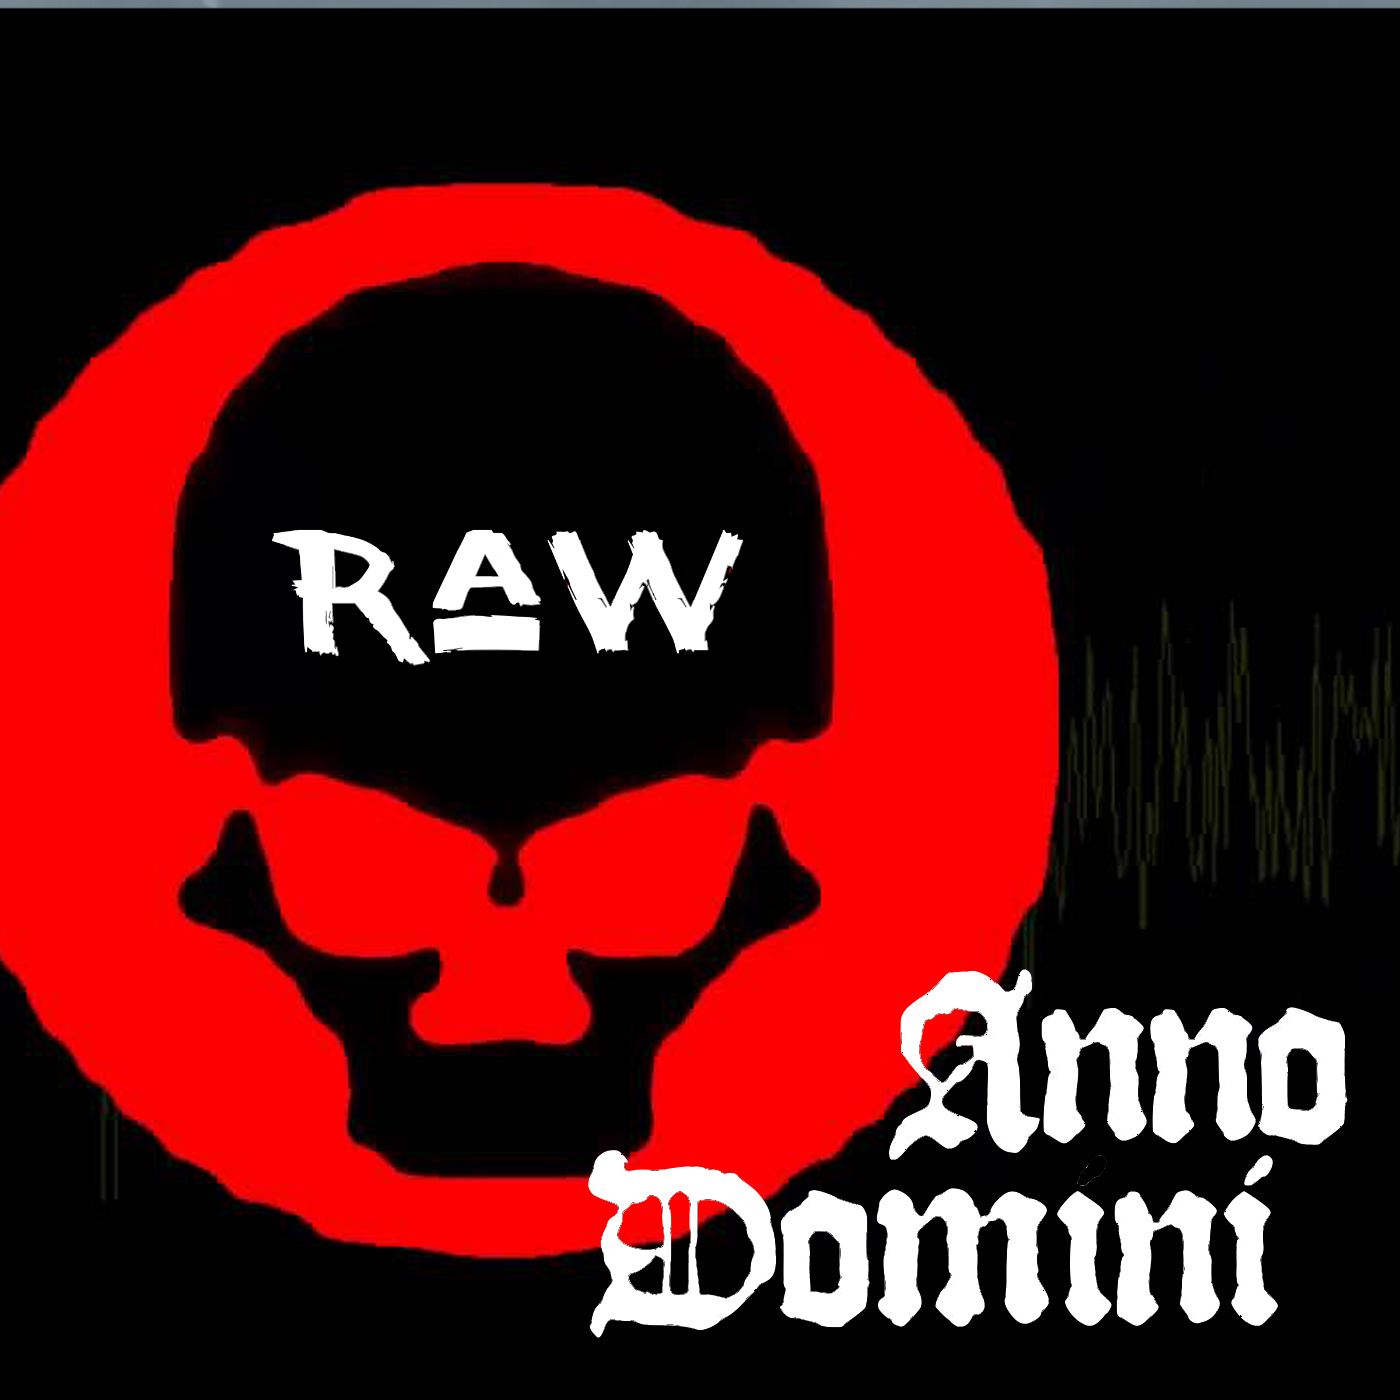 Raw 0044: The Time Ghost - A.D. 002